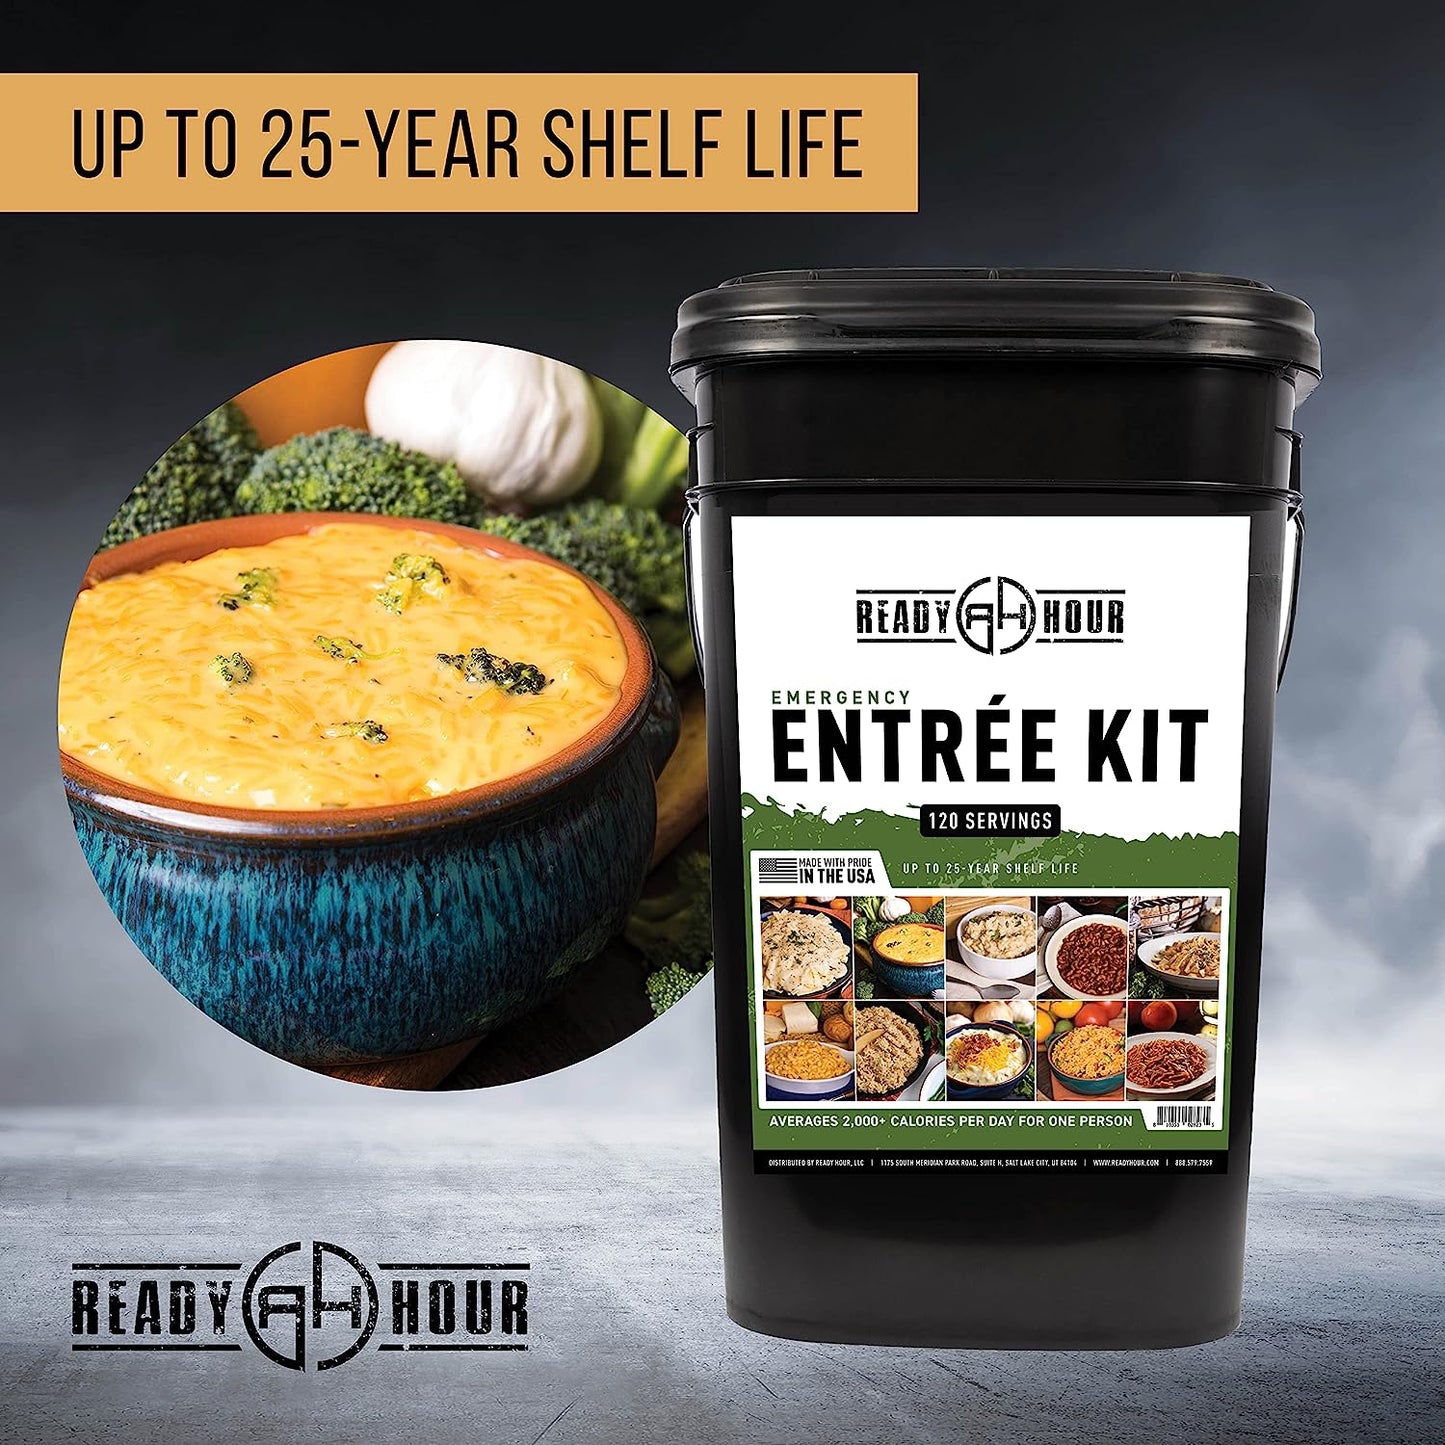 Emergency Meal Entrées, Real Non-Perishable Meals, 25-Year Shelf Life, Portable Flood-Safe Container, 120 Servings